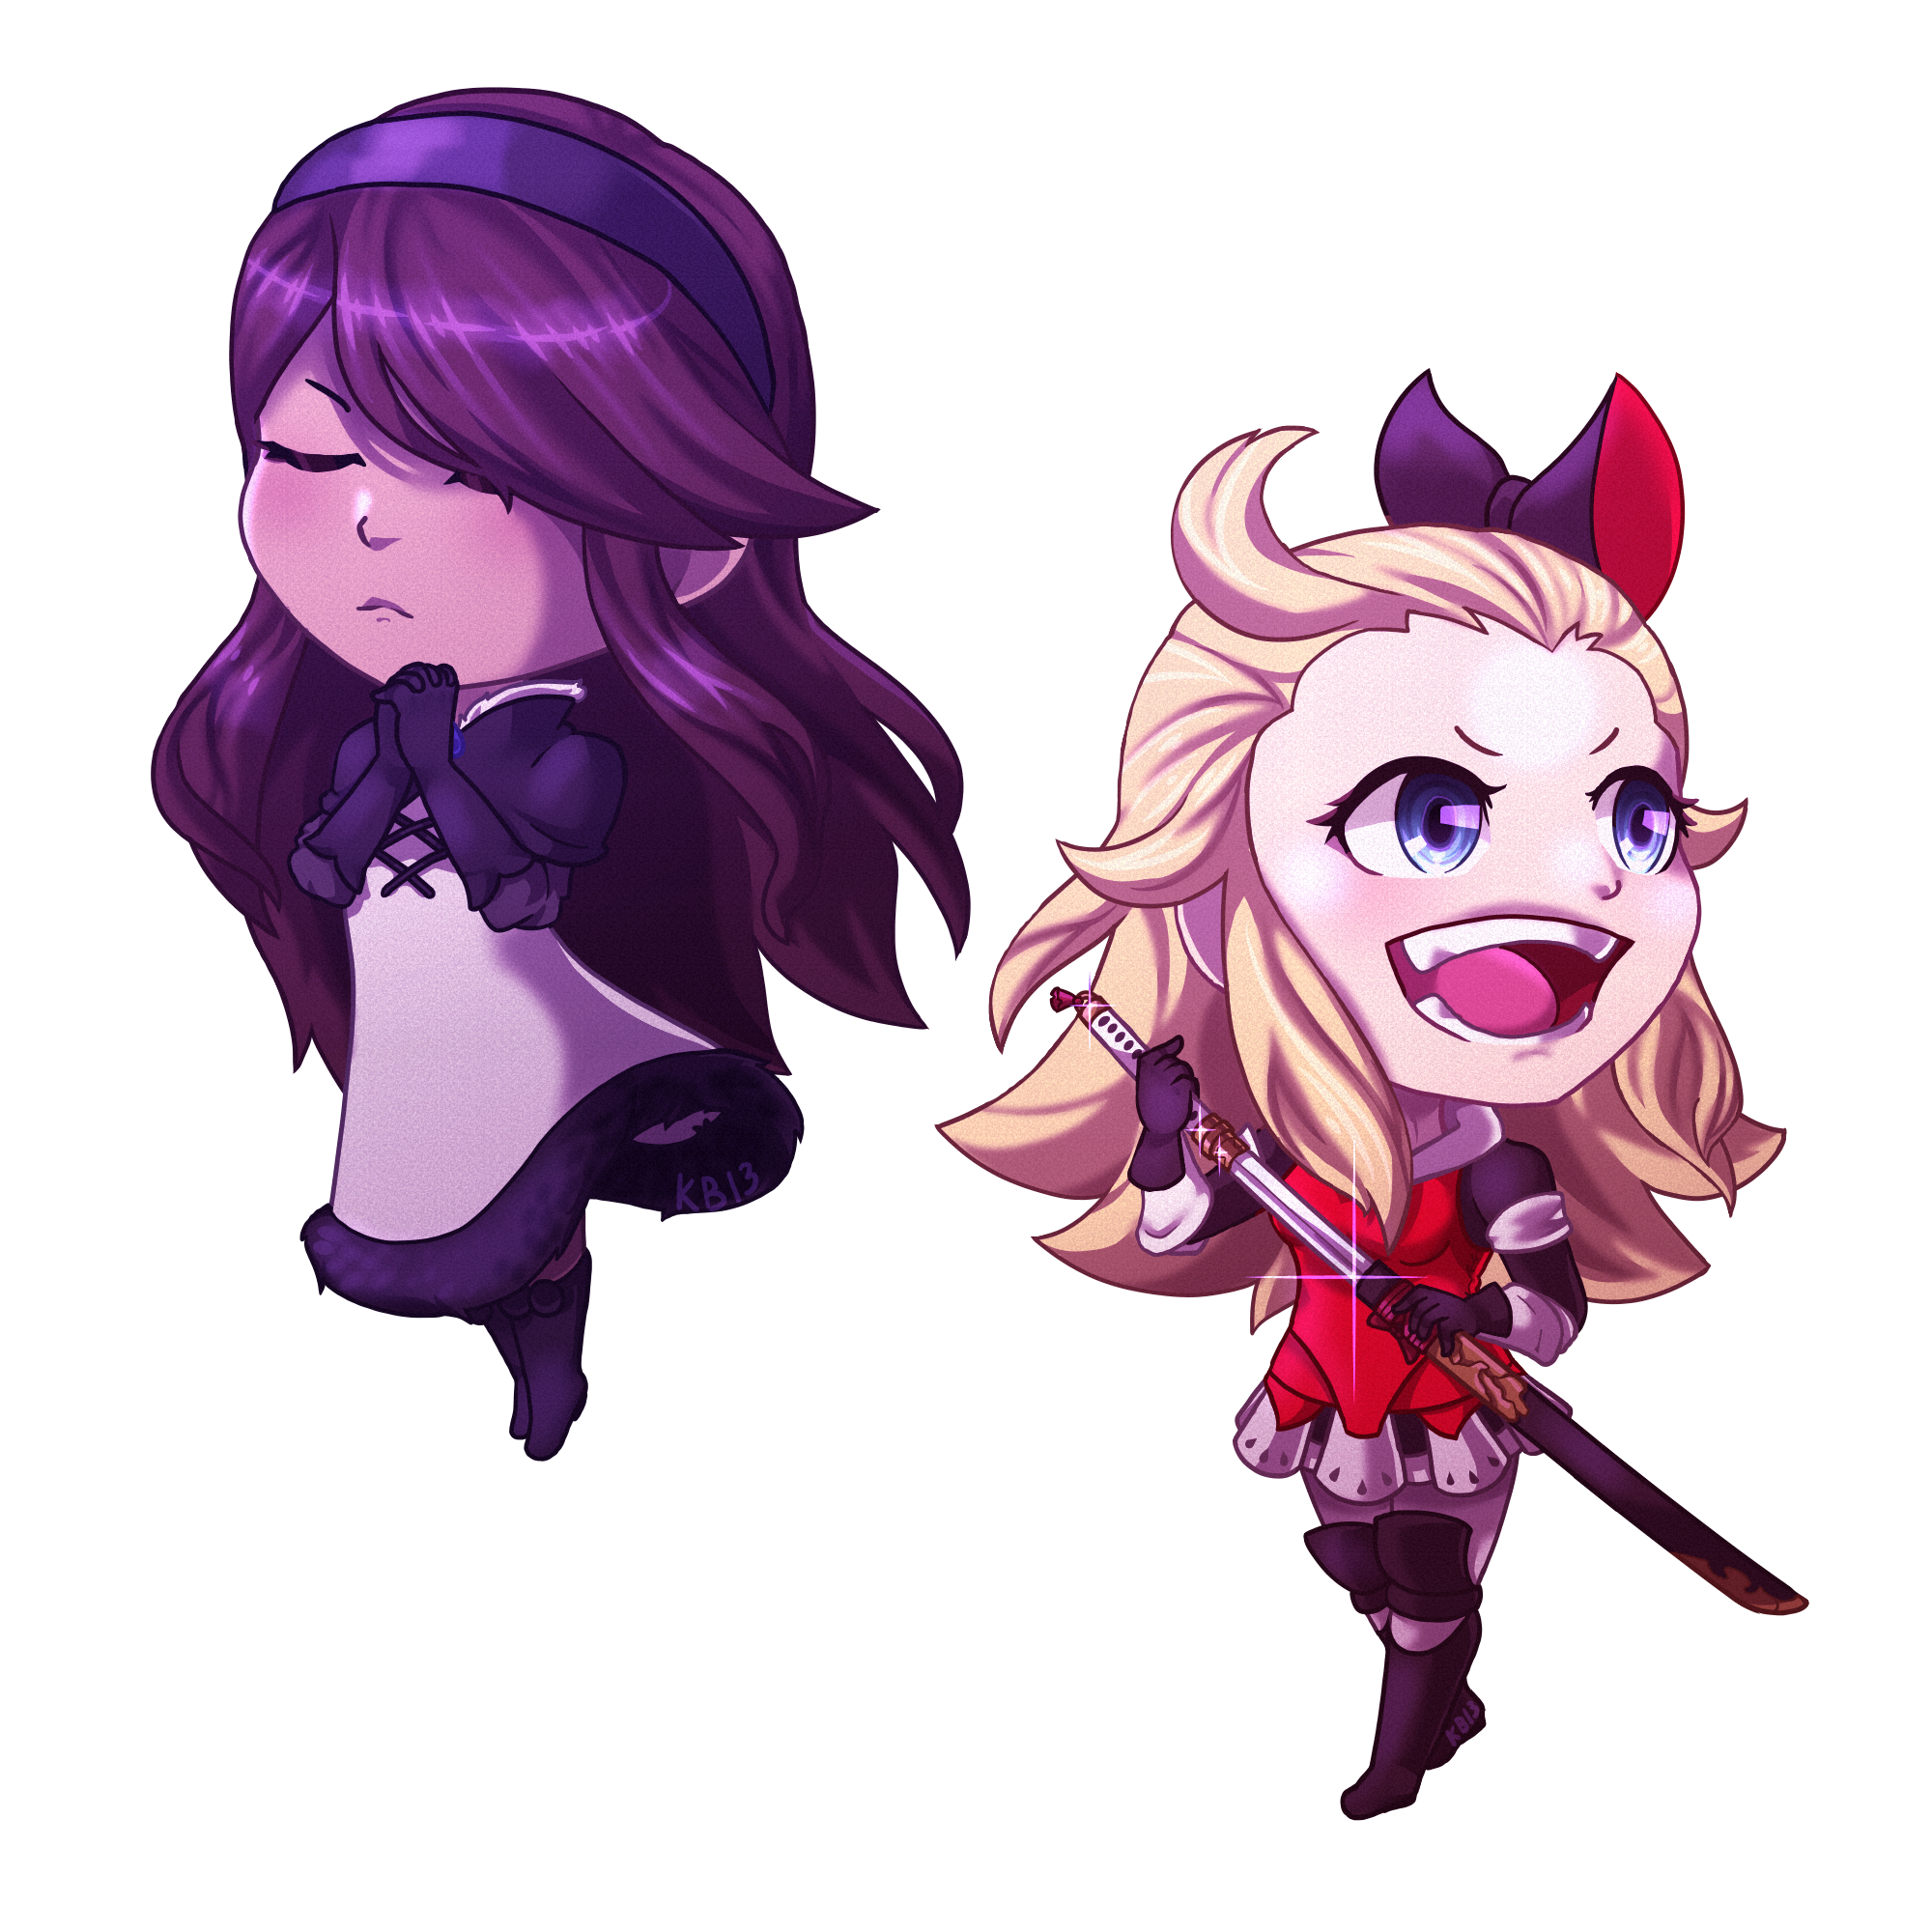 Chibi art of Agnes and Edea from Bravely Default